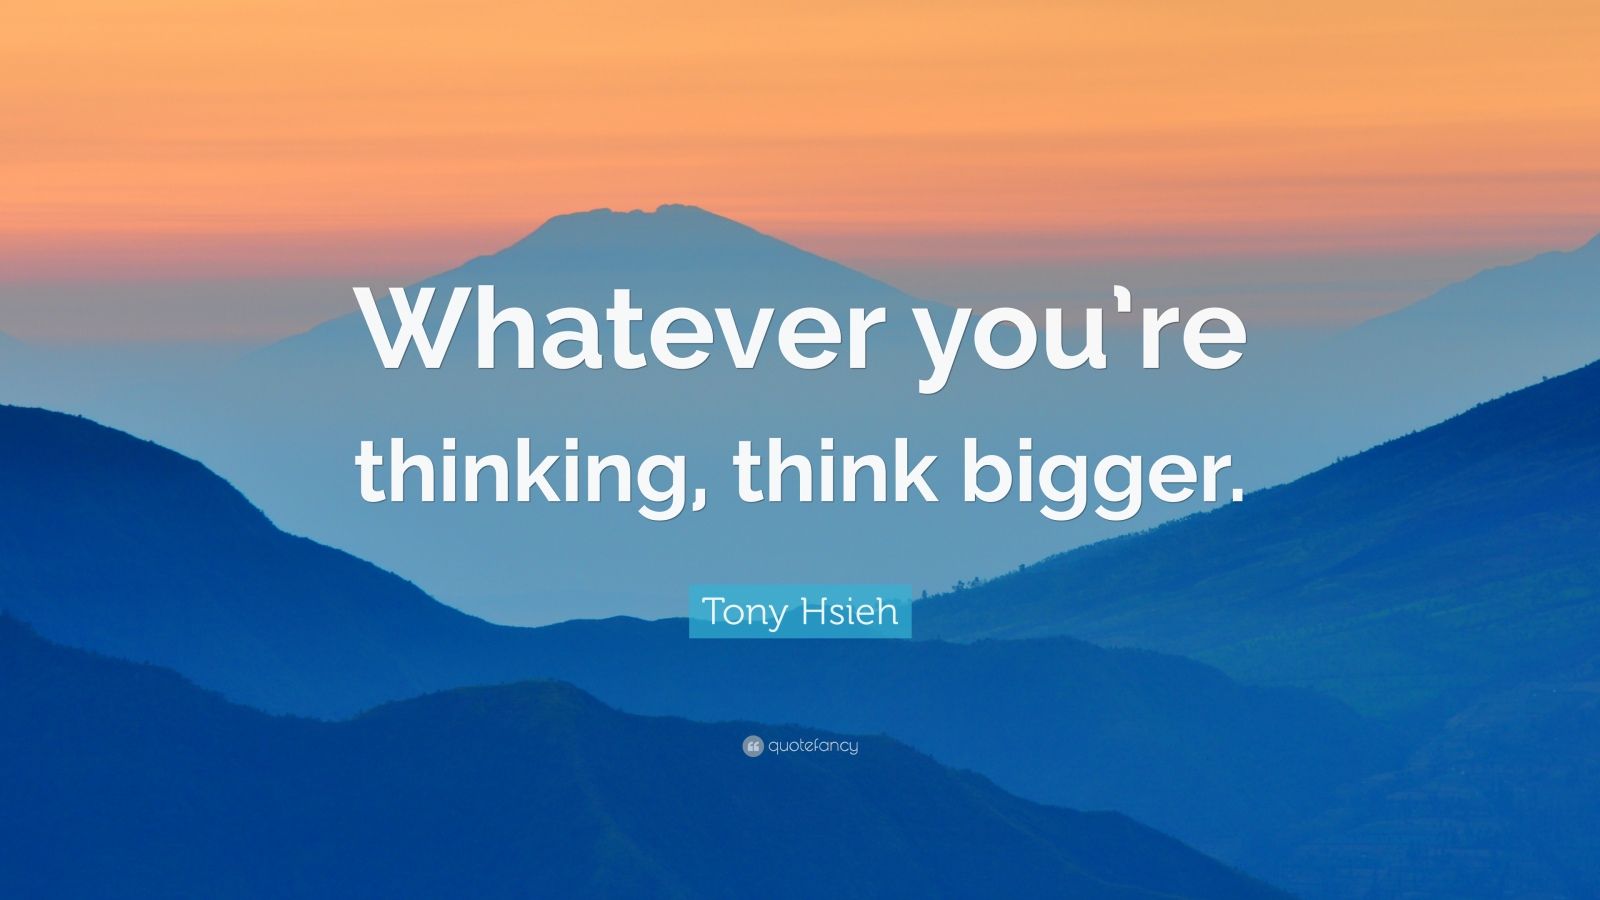 Startup Quotes: “Whatever you’re thinking, think bigger.” — Tony Hsieh